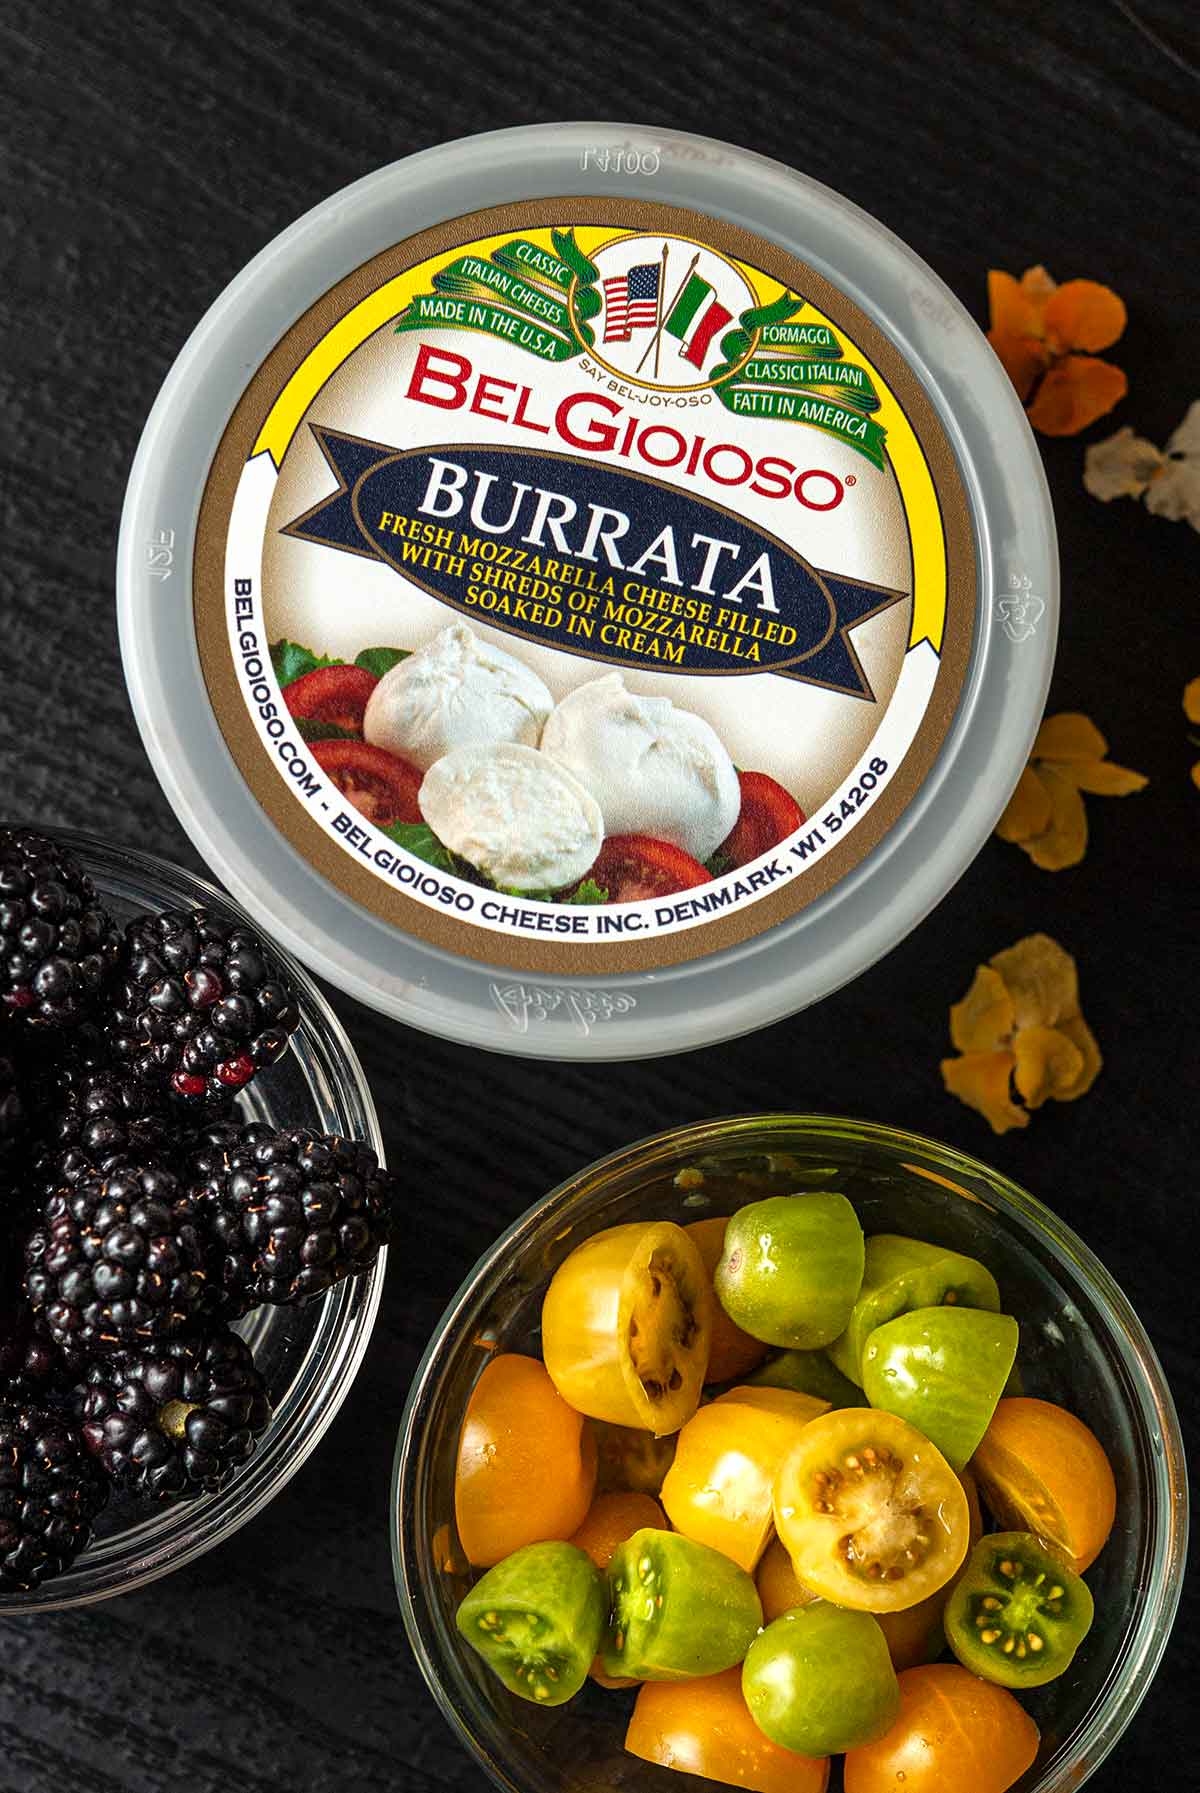 a Bel Gioioso burrata container on a table beside bowls of sliced tomatoes and blackberries.